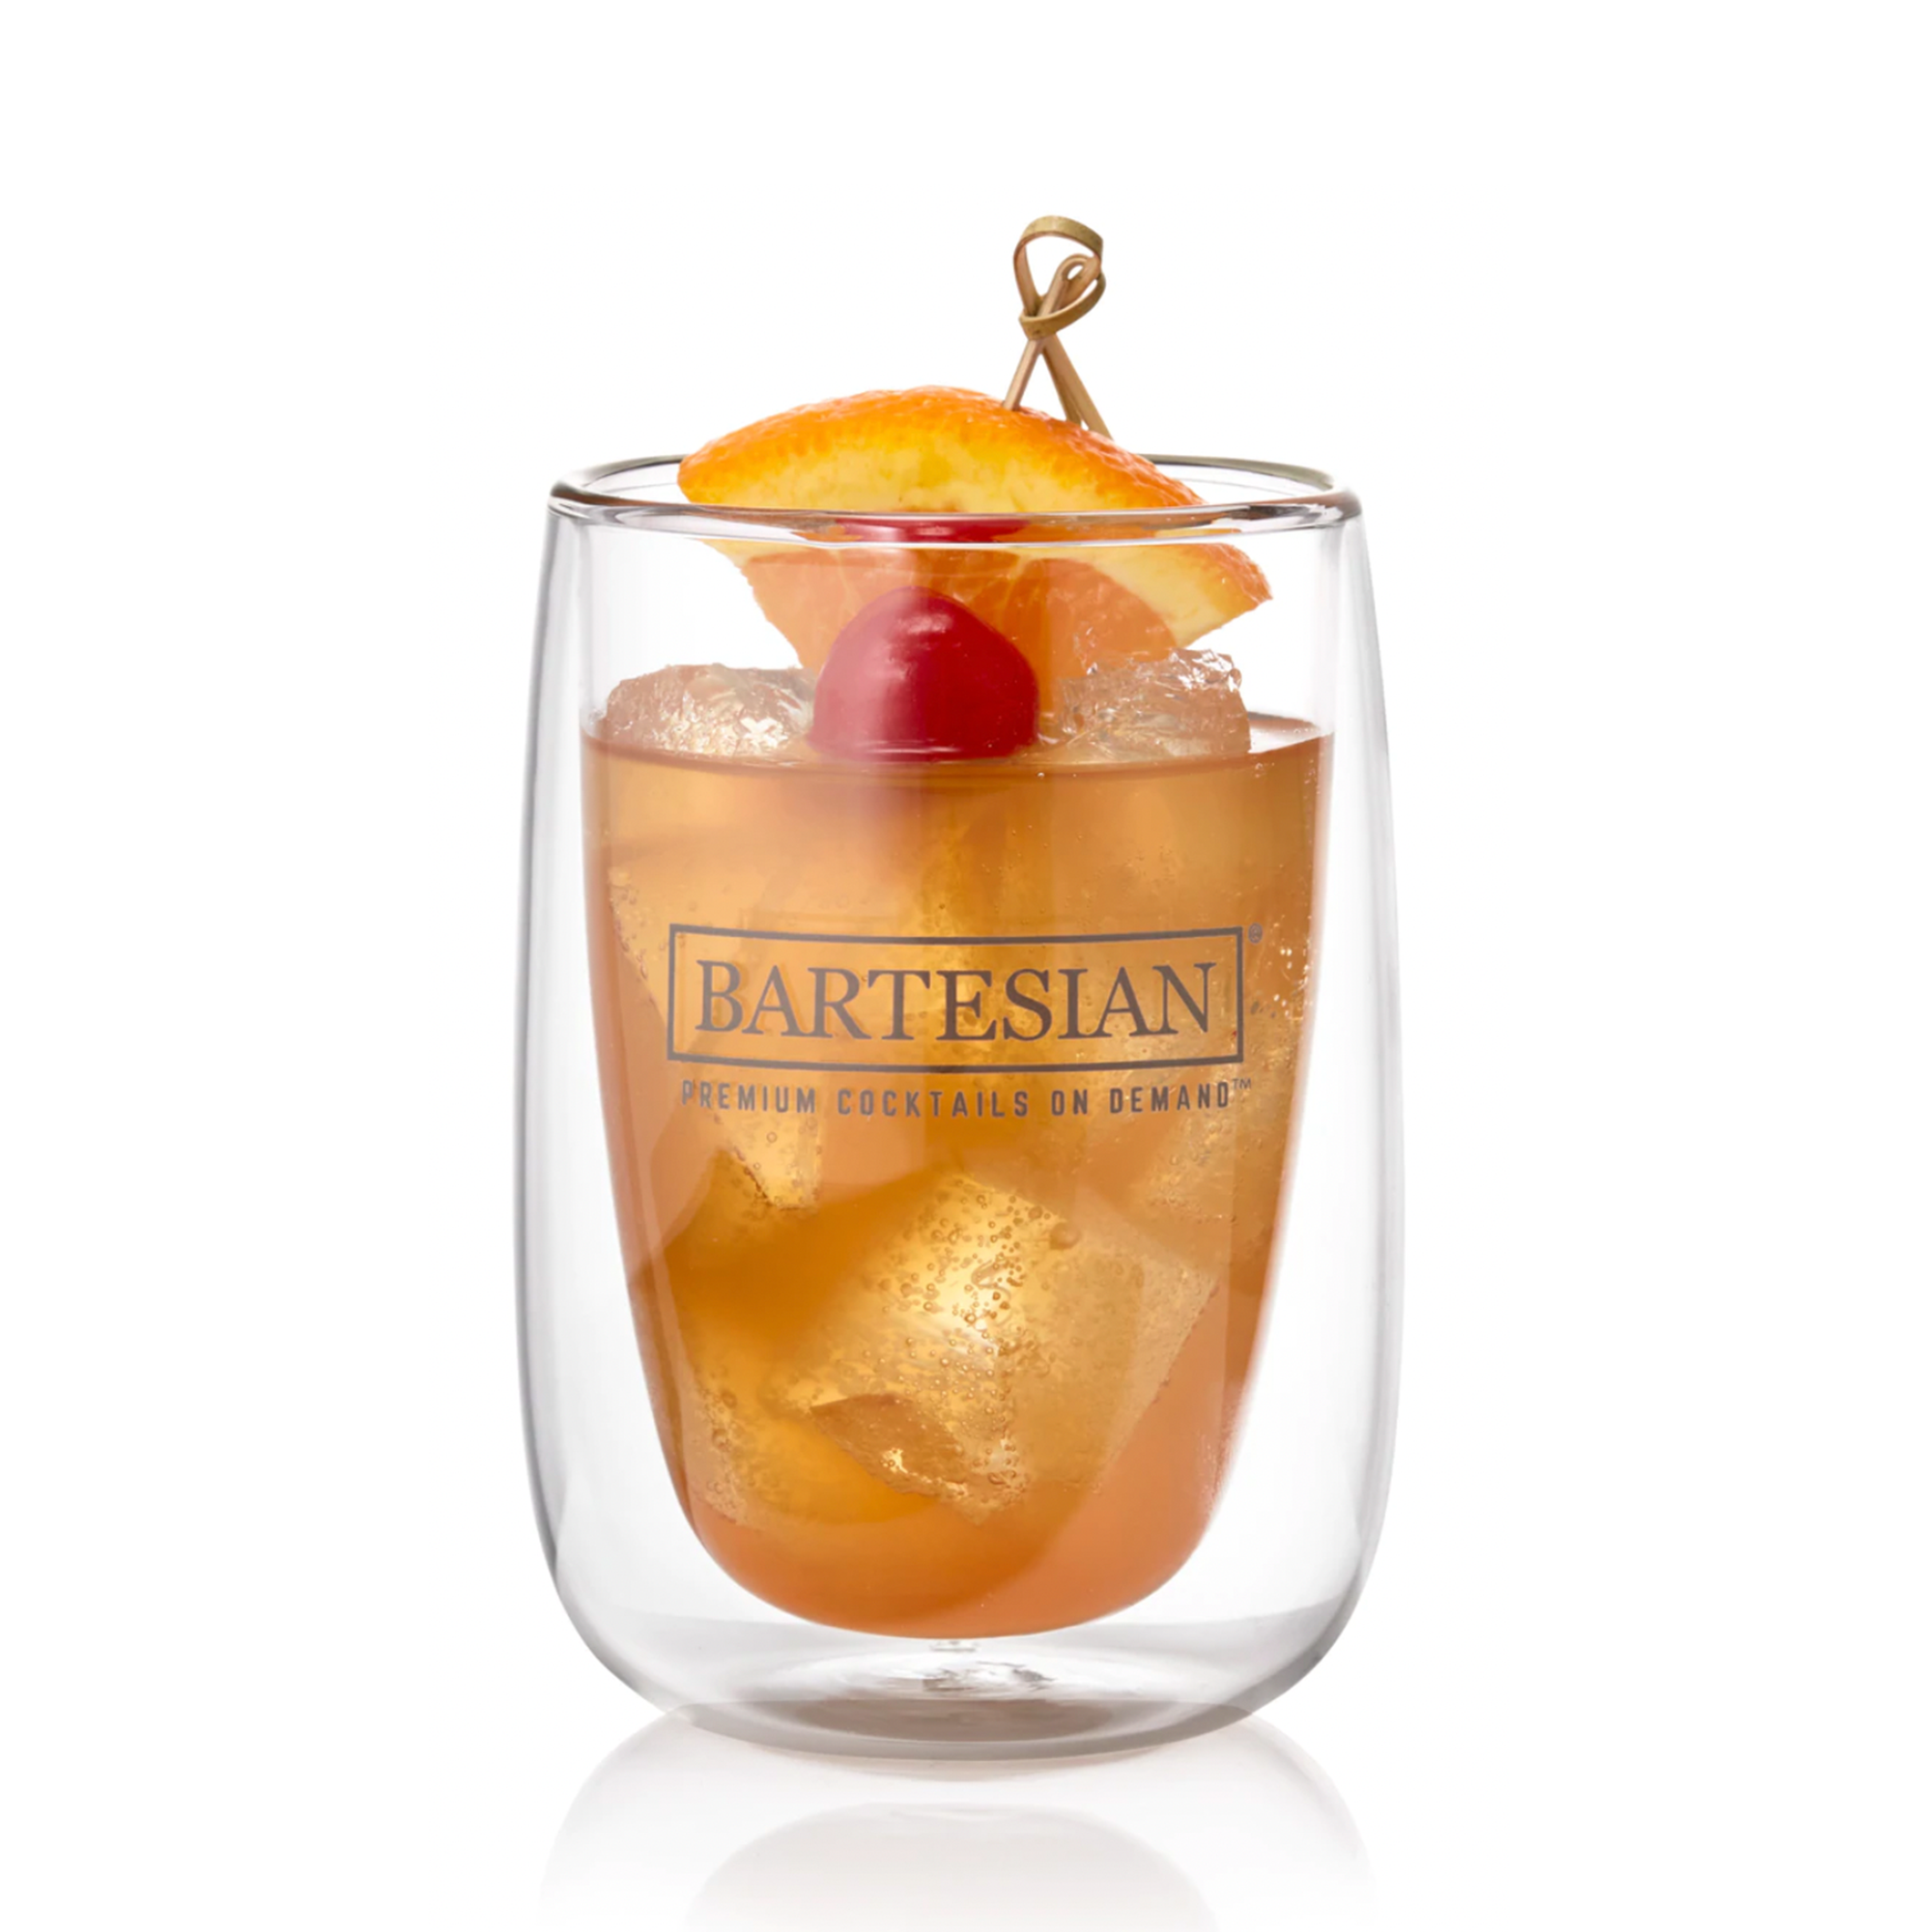 Bartesian Cocktail Glass Sets - Coupe Drinking Glassware for Cocktails & Mocktails - Bar Glasses for Martini, Margarita, Pina Colada, Whiskey Sour